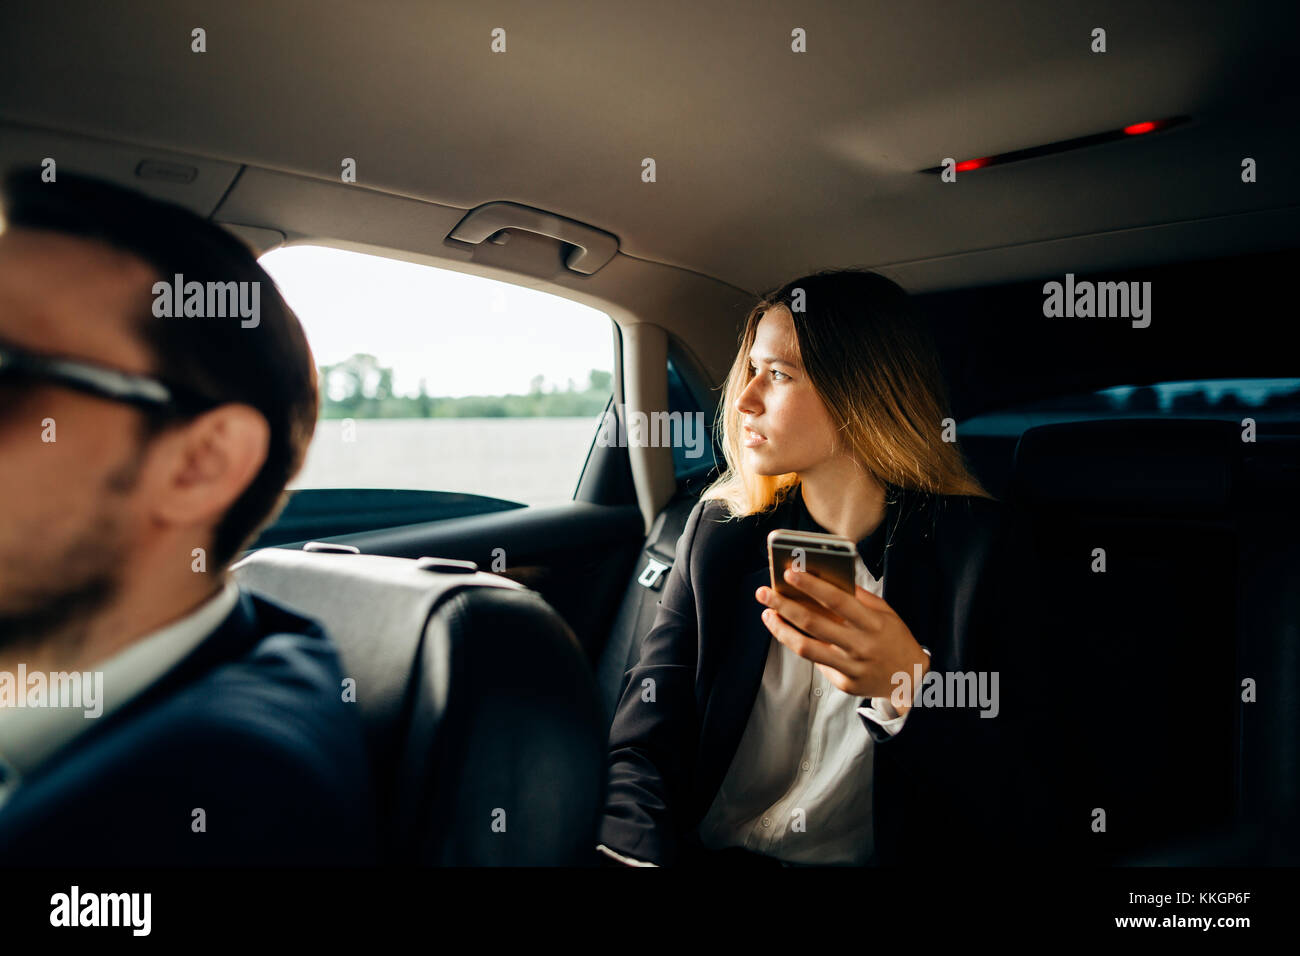 Business Woman Working Inside Taxi High Resolution Stock Photography And Images Alamy This creates racial image and narrative bias in causing lack of interest in changes and improvements within the institution and i. https www alamy com stock image business woman using smart phone and smiling while sitting on back 166940439 html